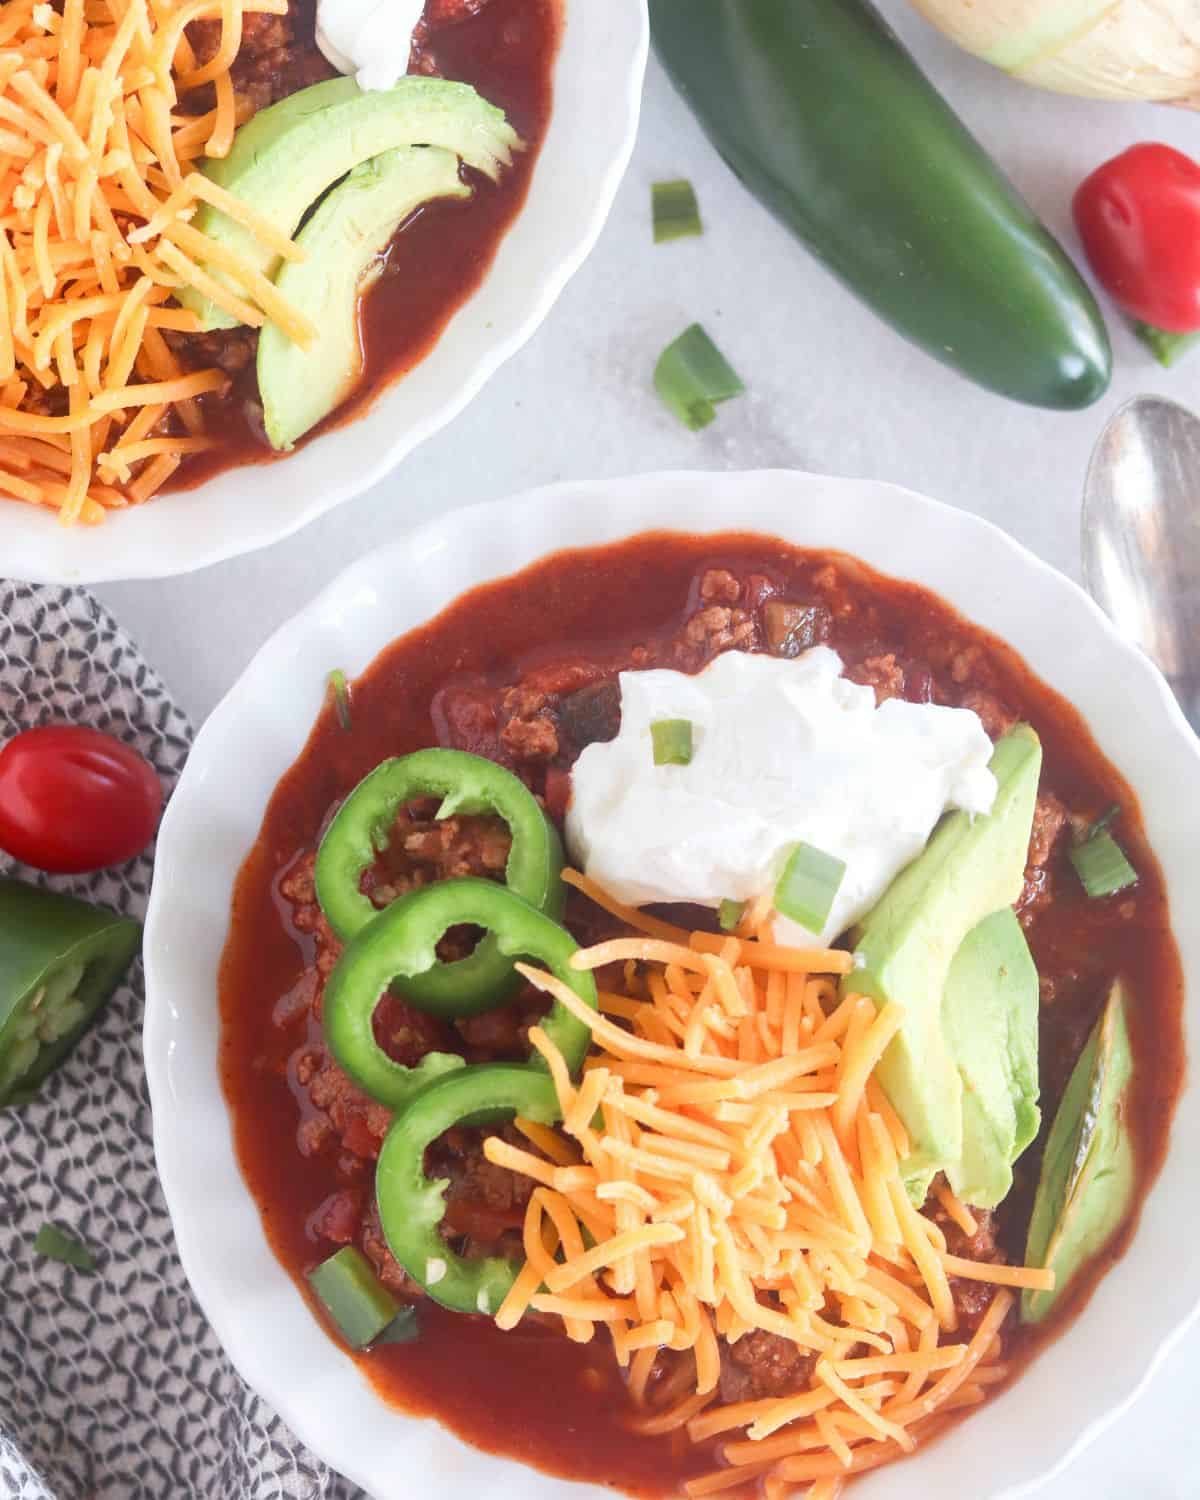 chili in bowls with garnishes.